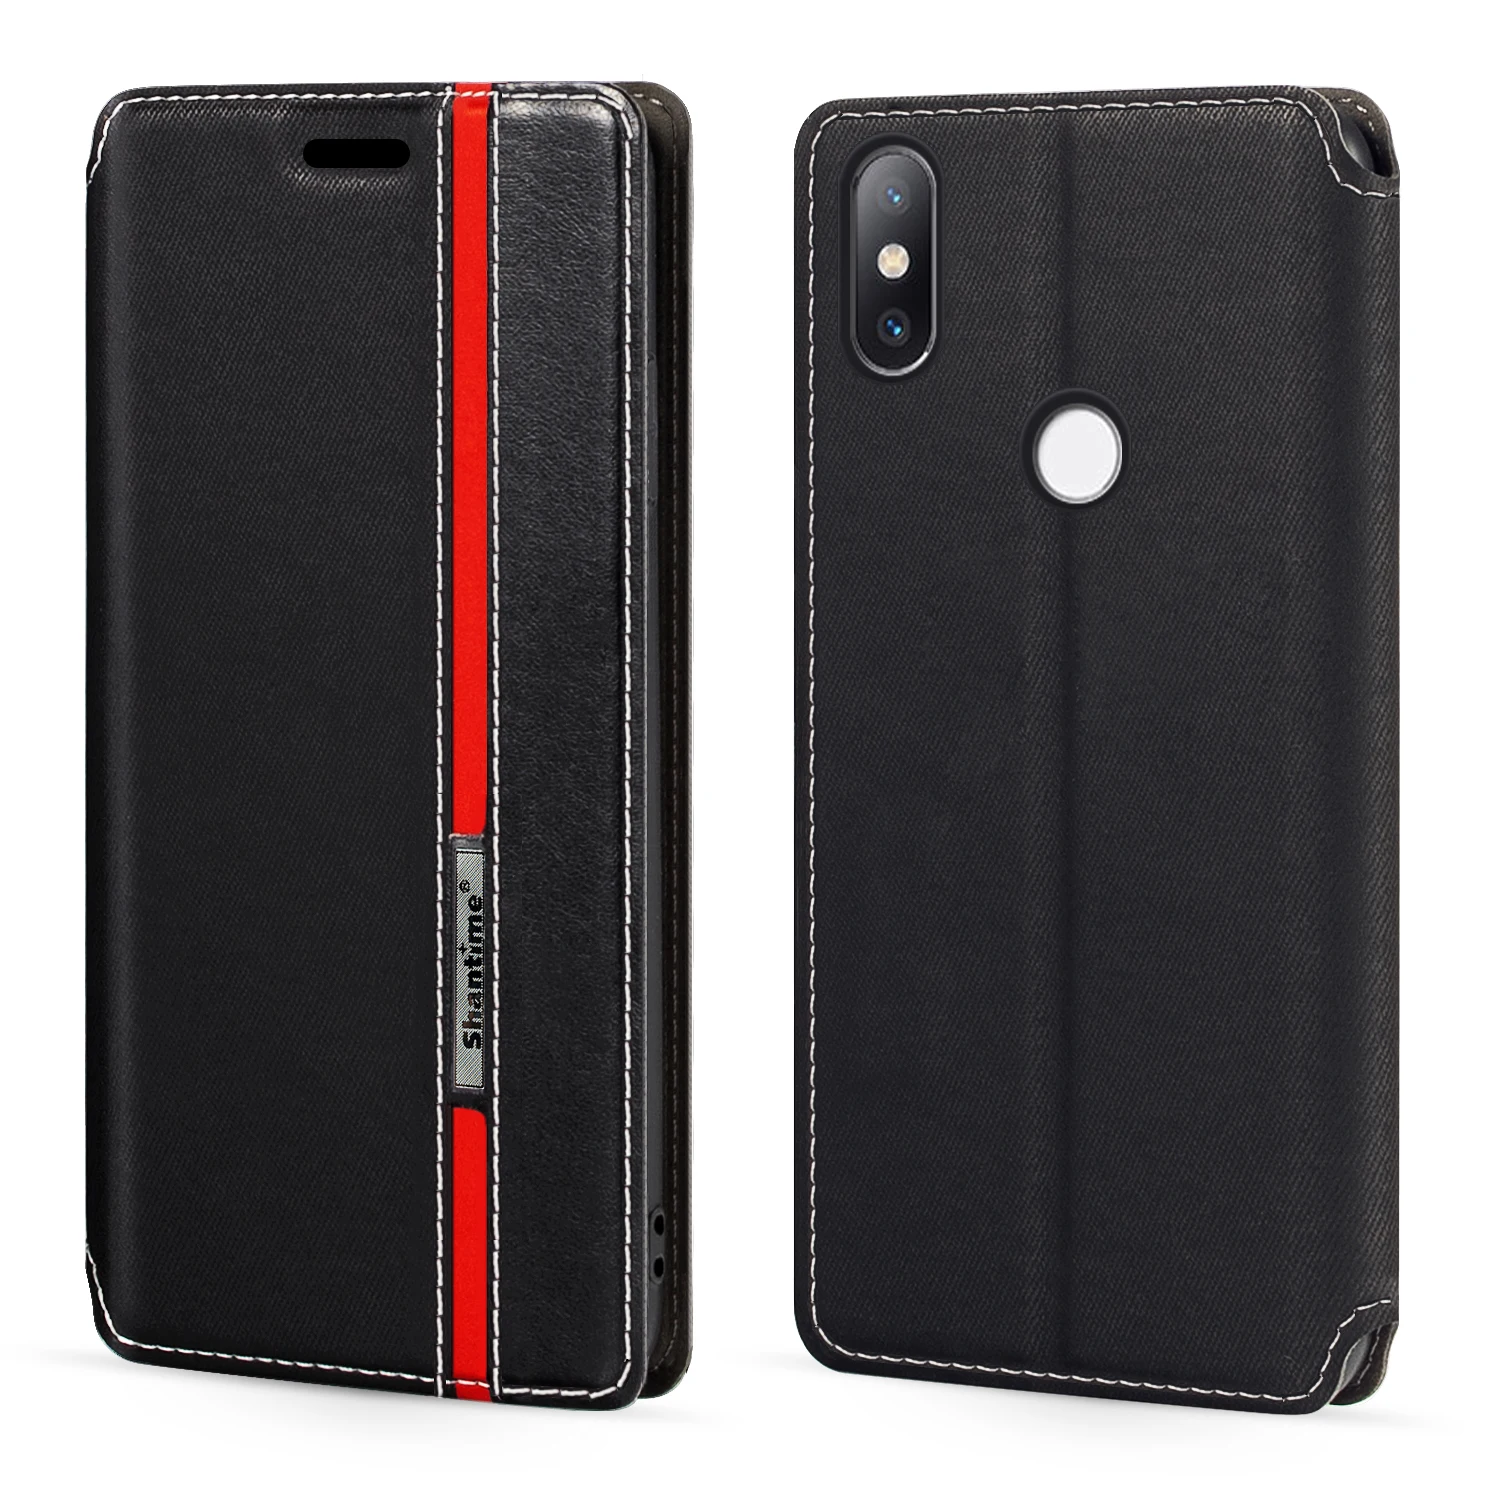 

For Xiaomi Mi Mix 2S Case Fashion Multicolor Magnetic Closure Leather Flip Case Cover with Card Holder 5.99 inches